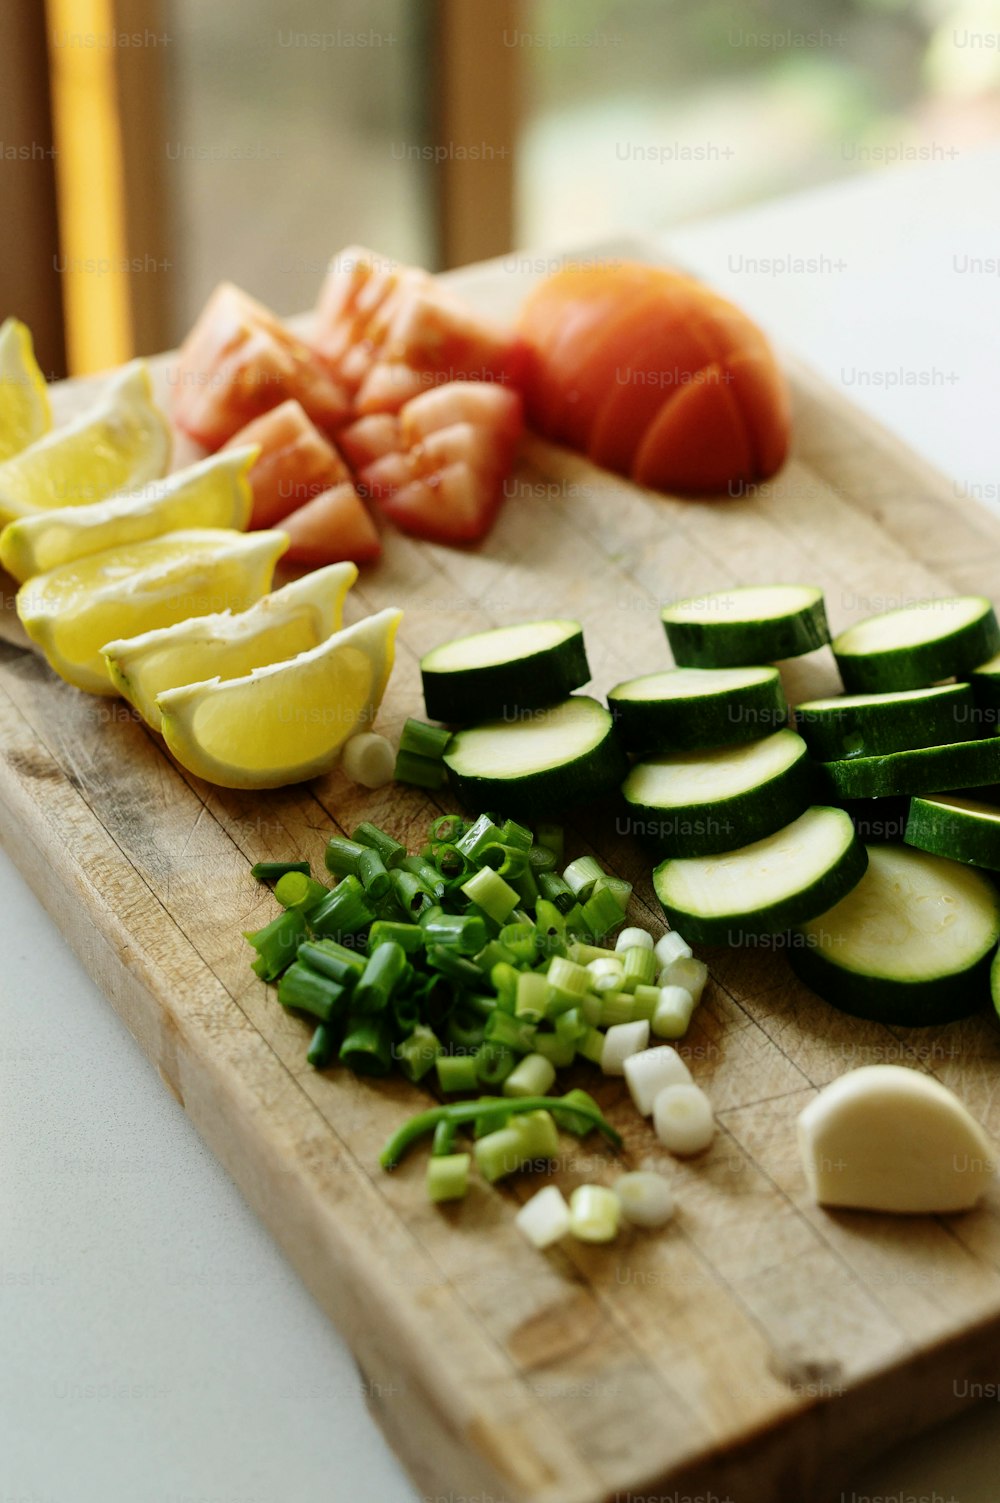 A cutting board with chopped vegetables including tomatoes, zucchini and lemon